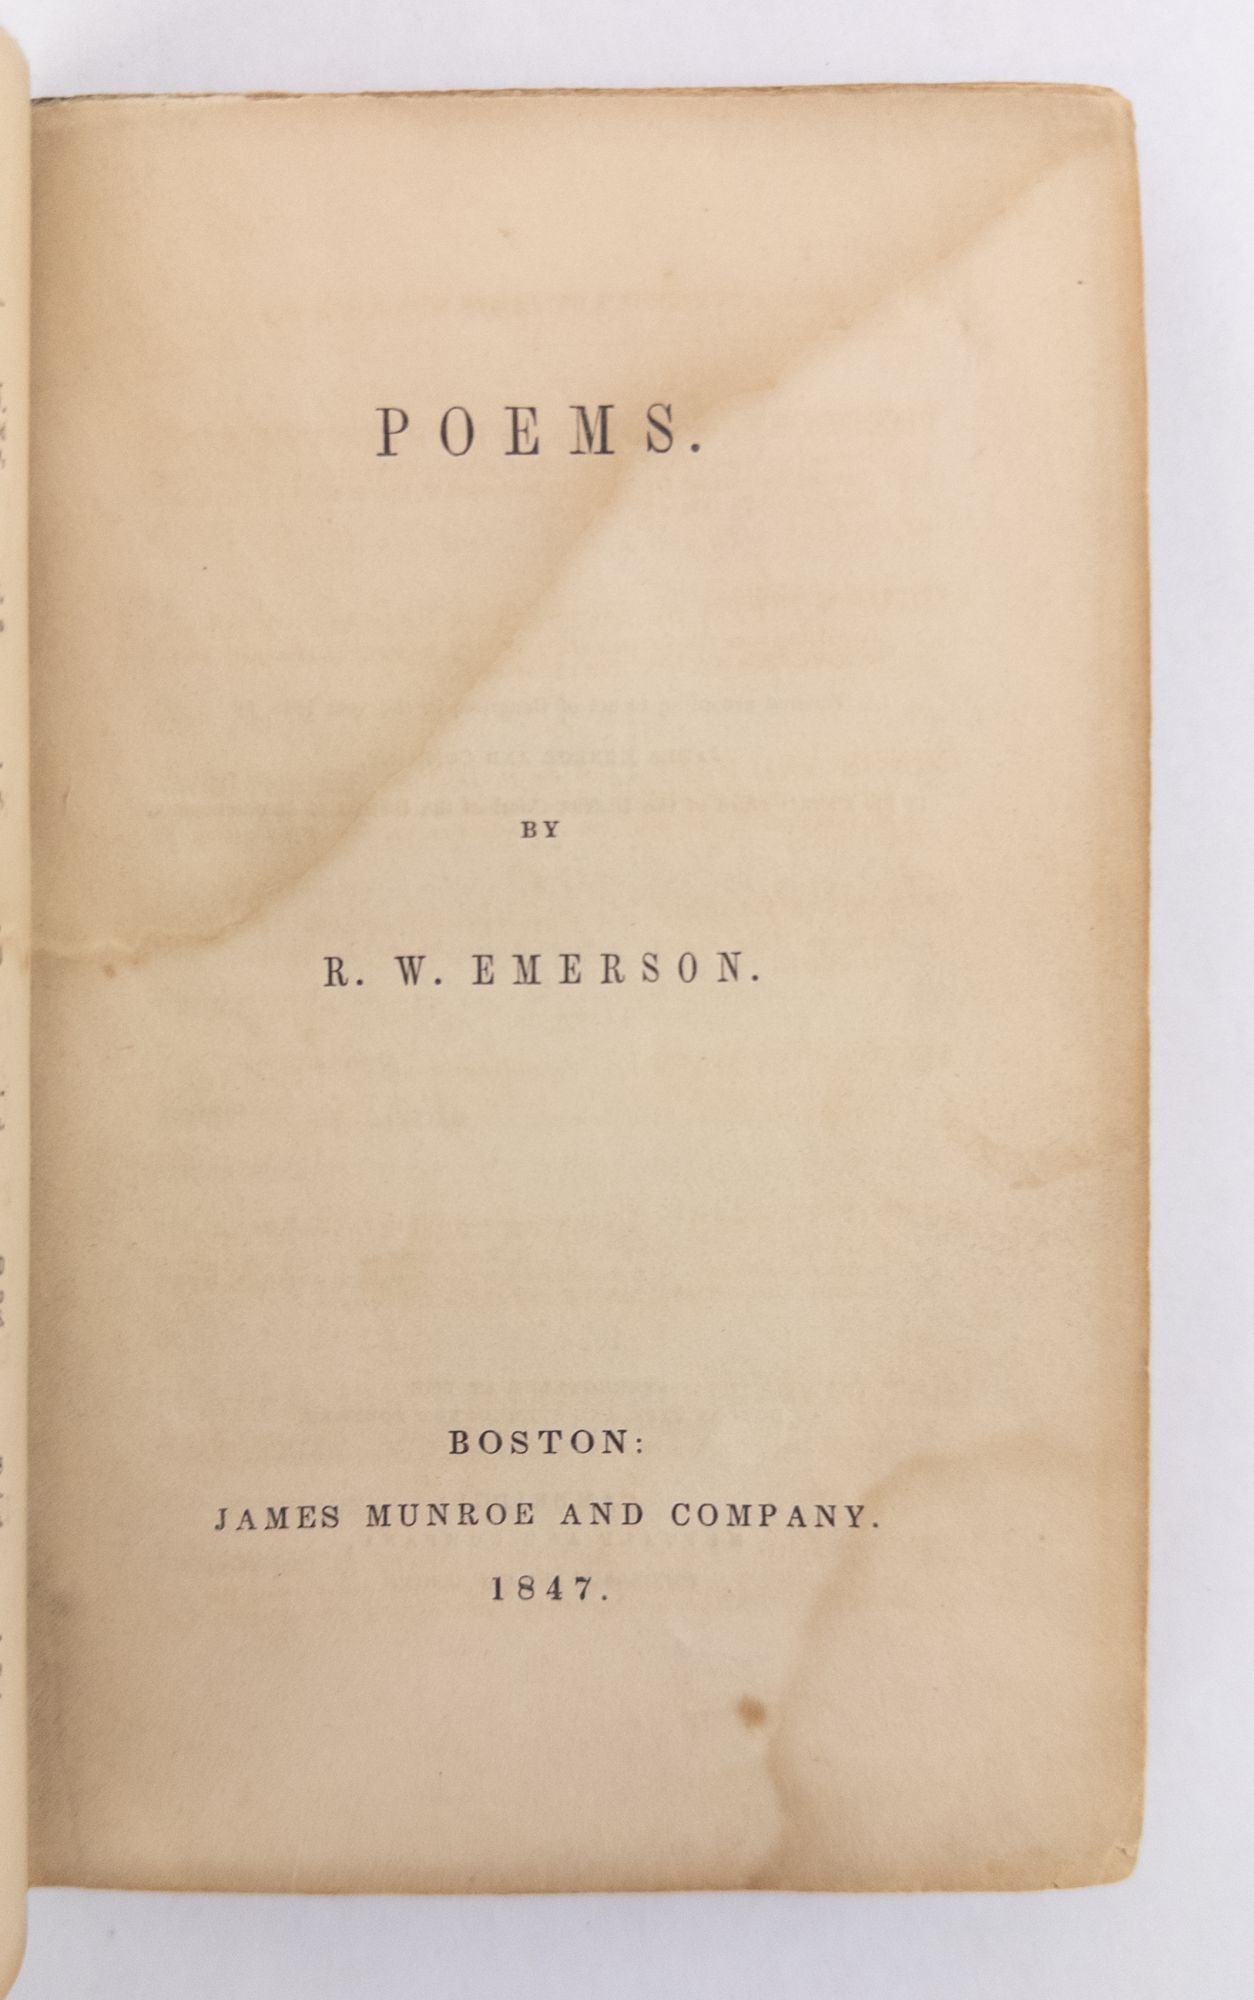 Product Image for POEMS